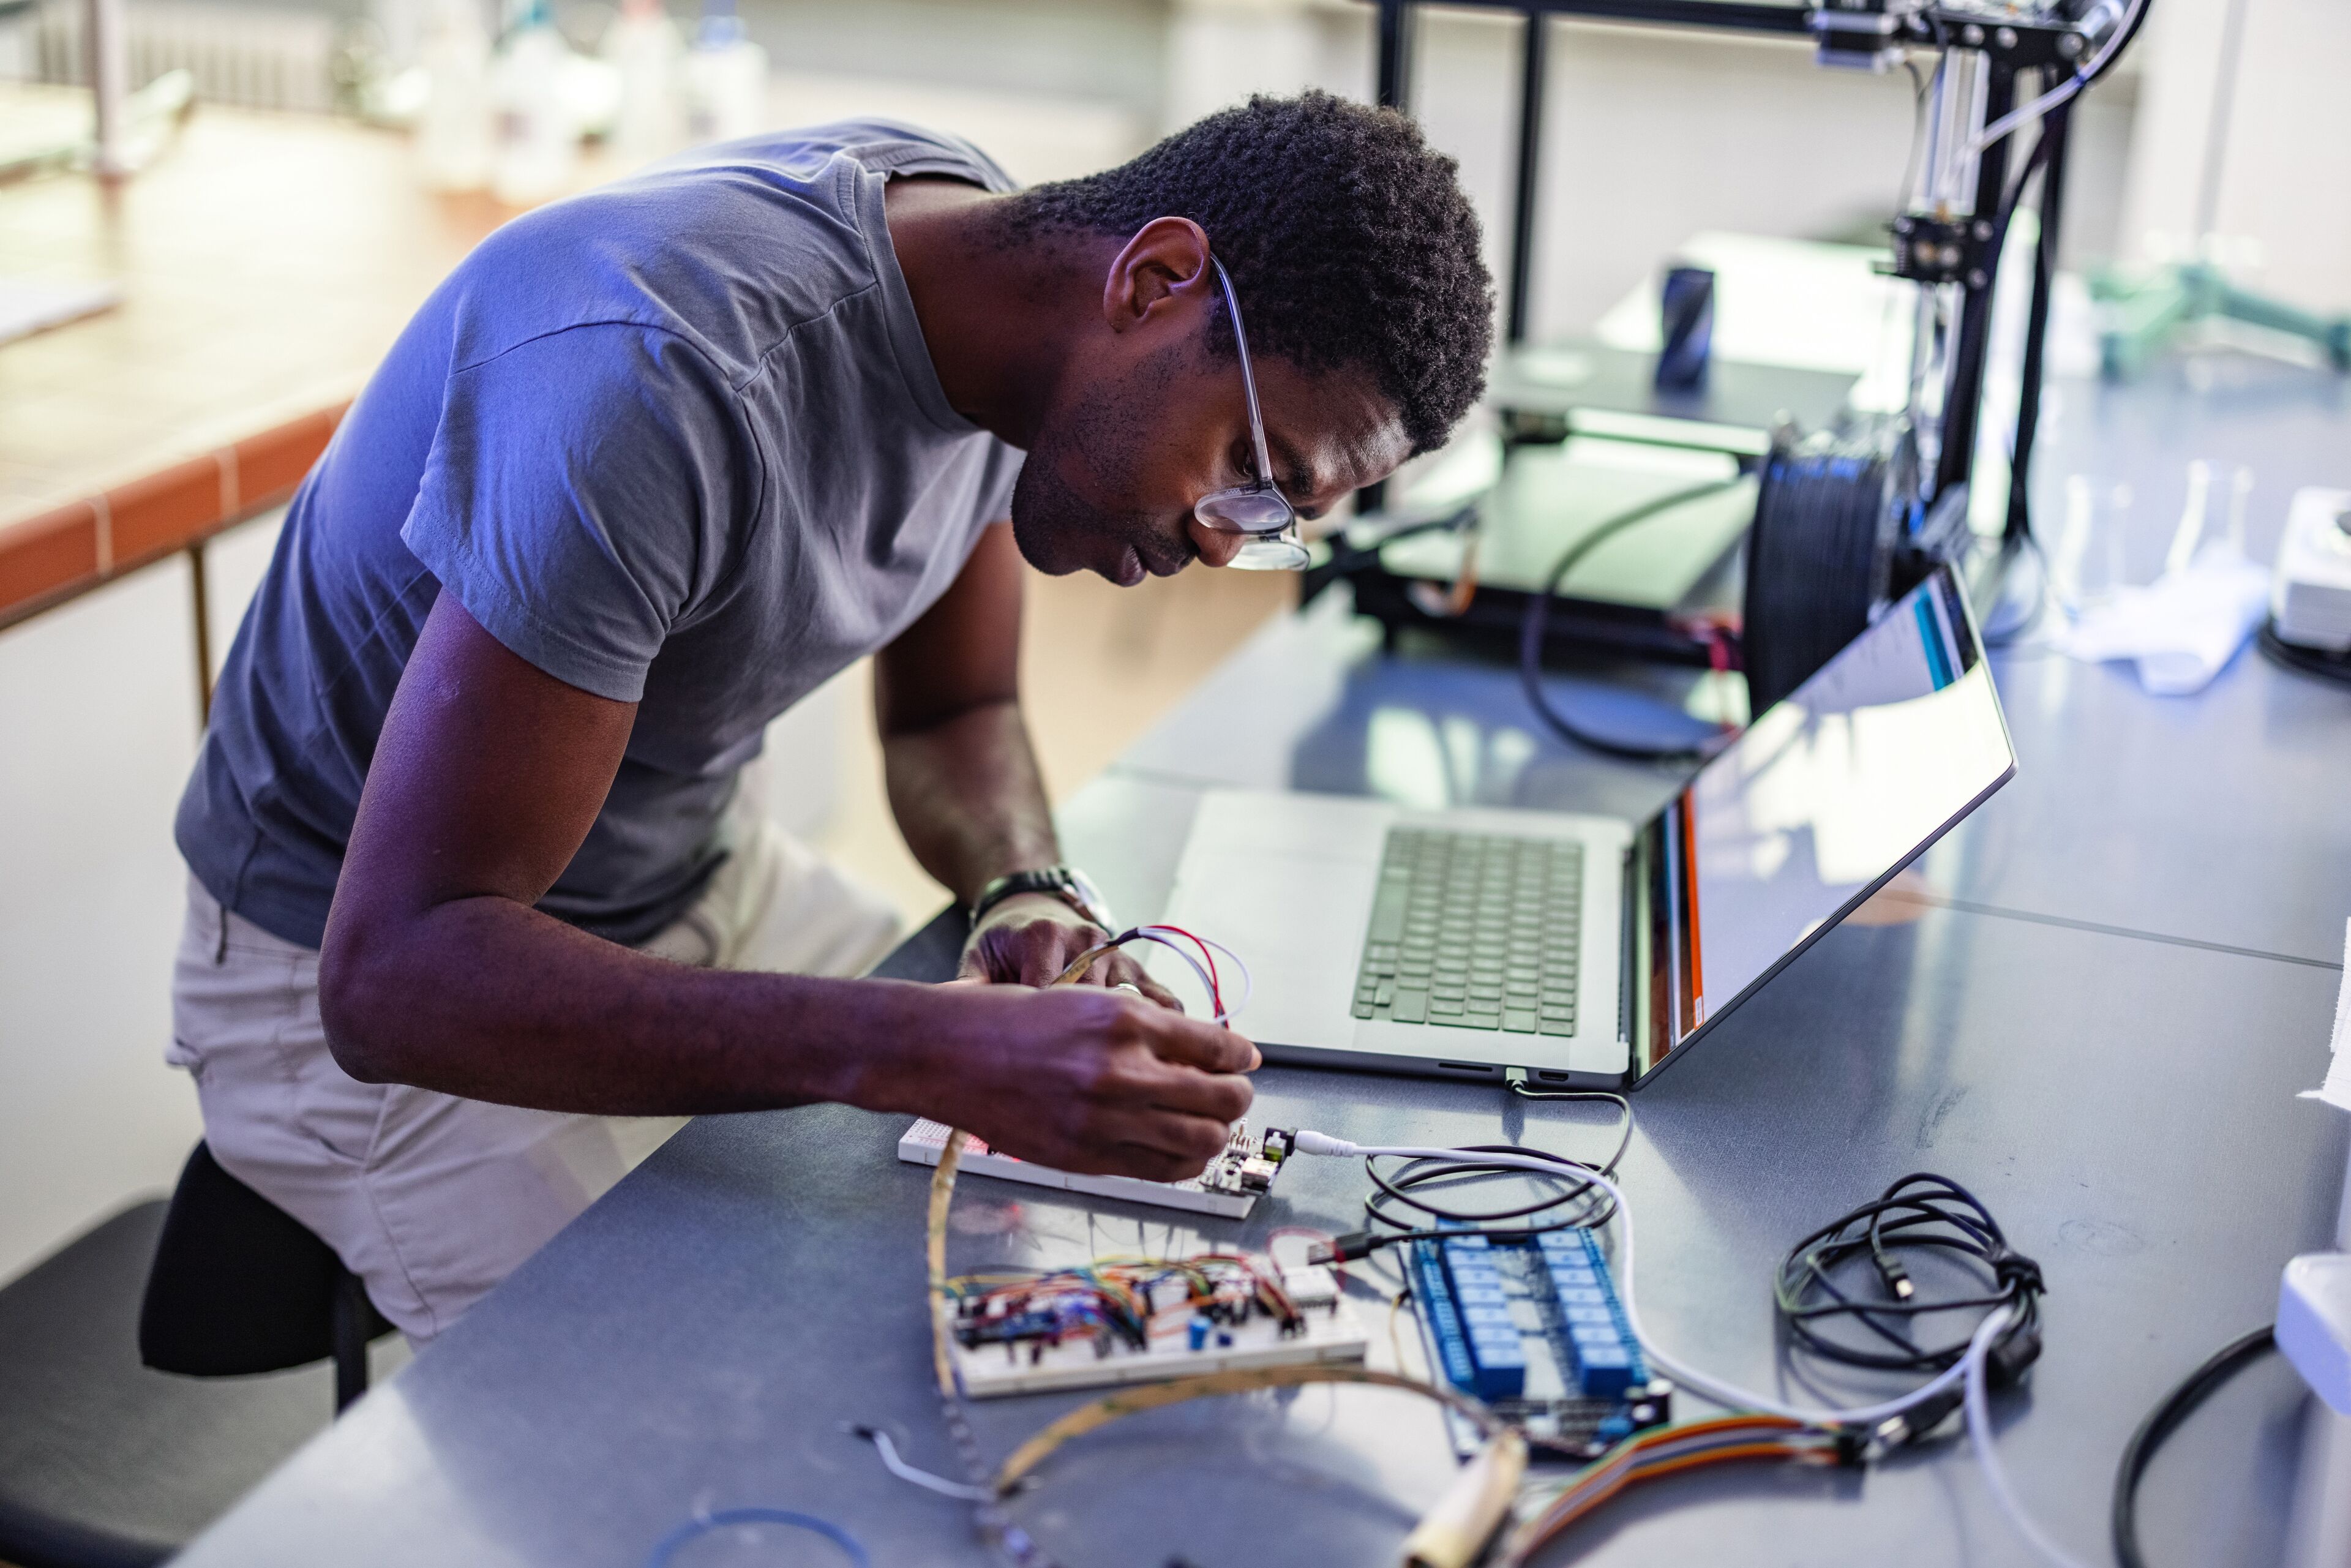 A focused individual is soldering a circuit board in a tech-laden workspace with a laptop nearby.